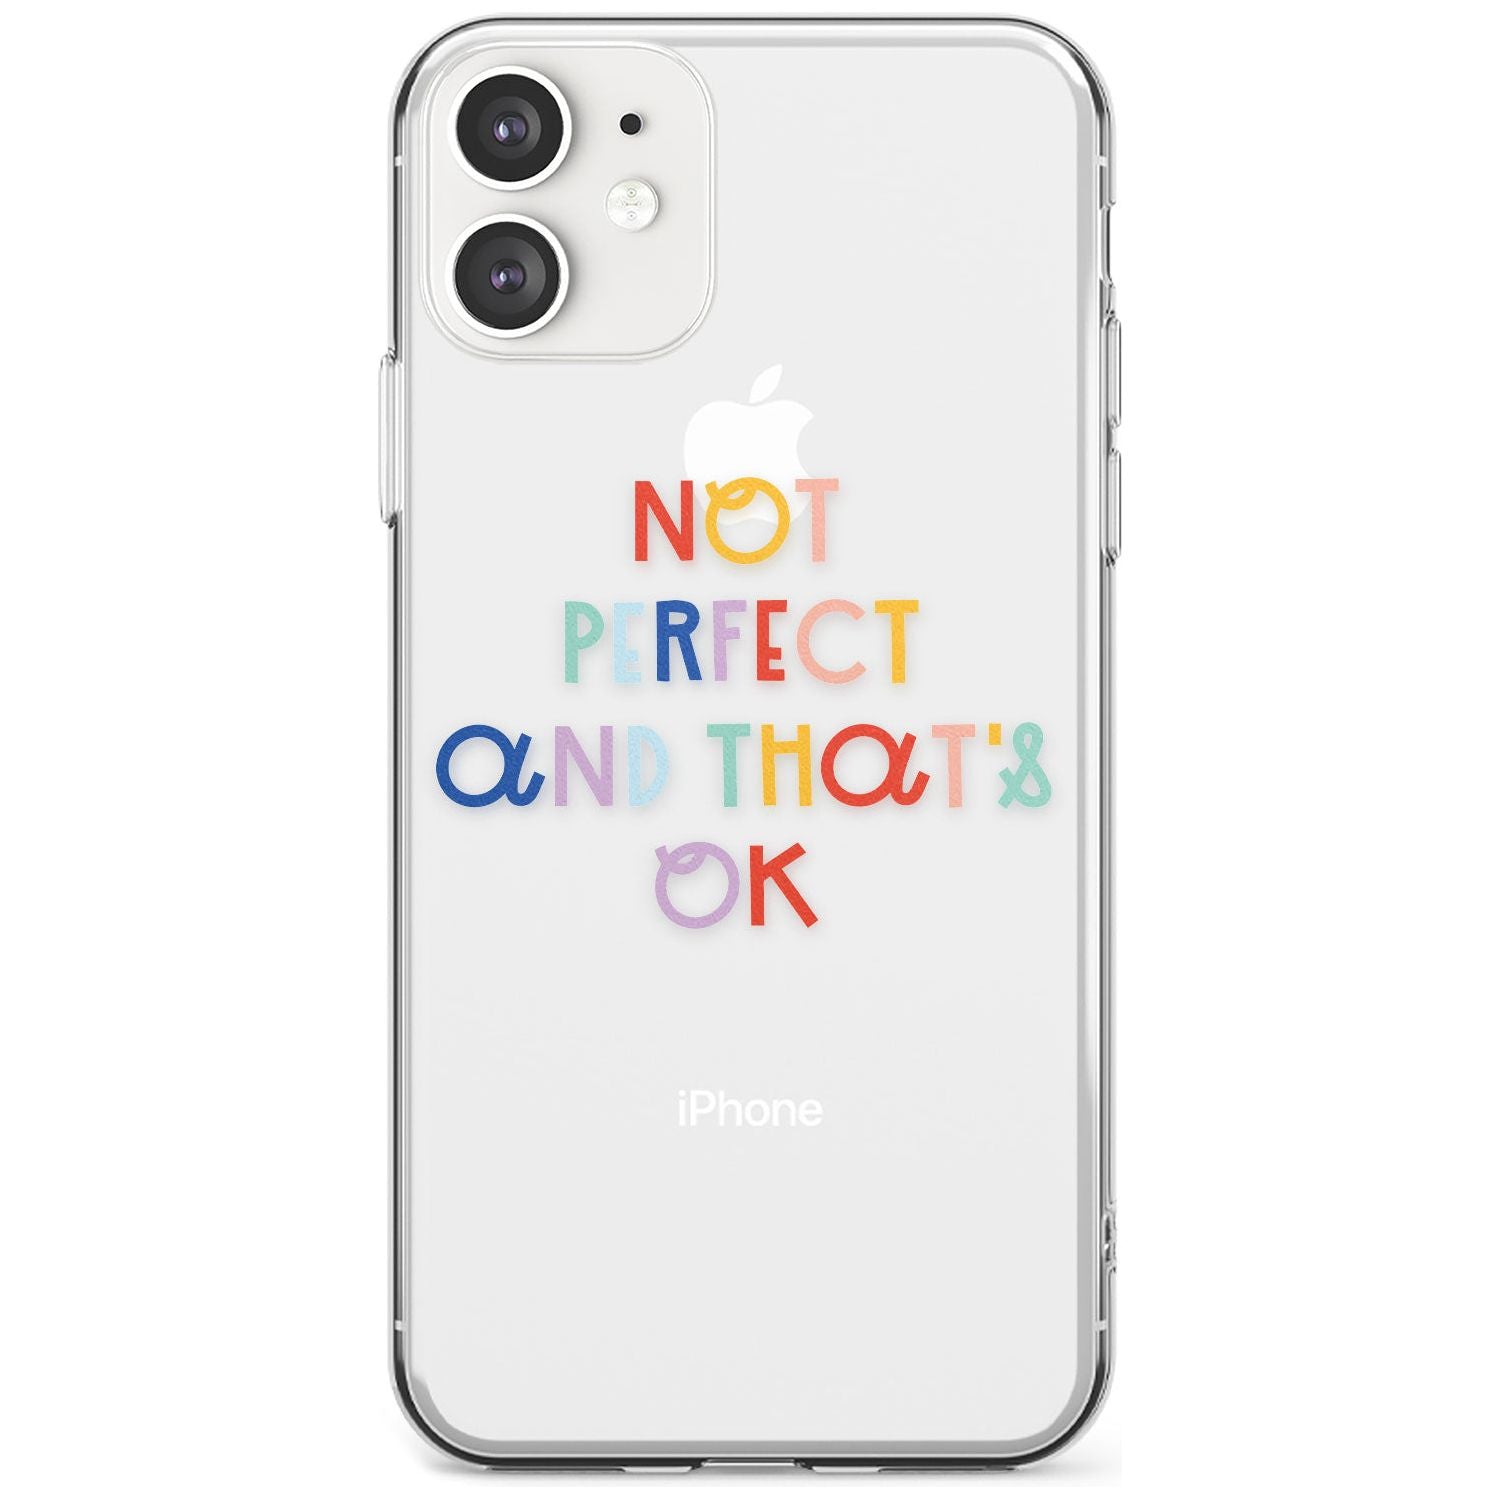 Not Perfect - Clear Slim TPU Phone Case for iPhone 11